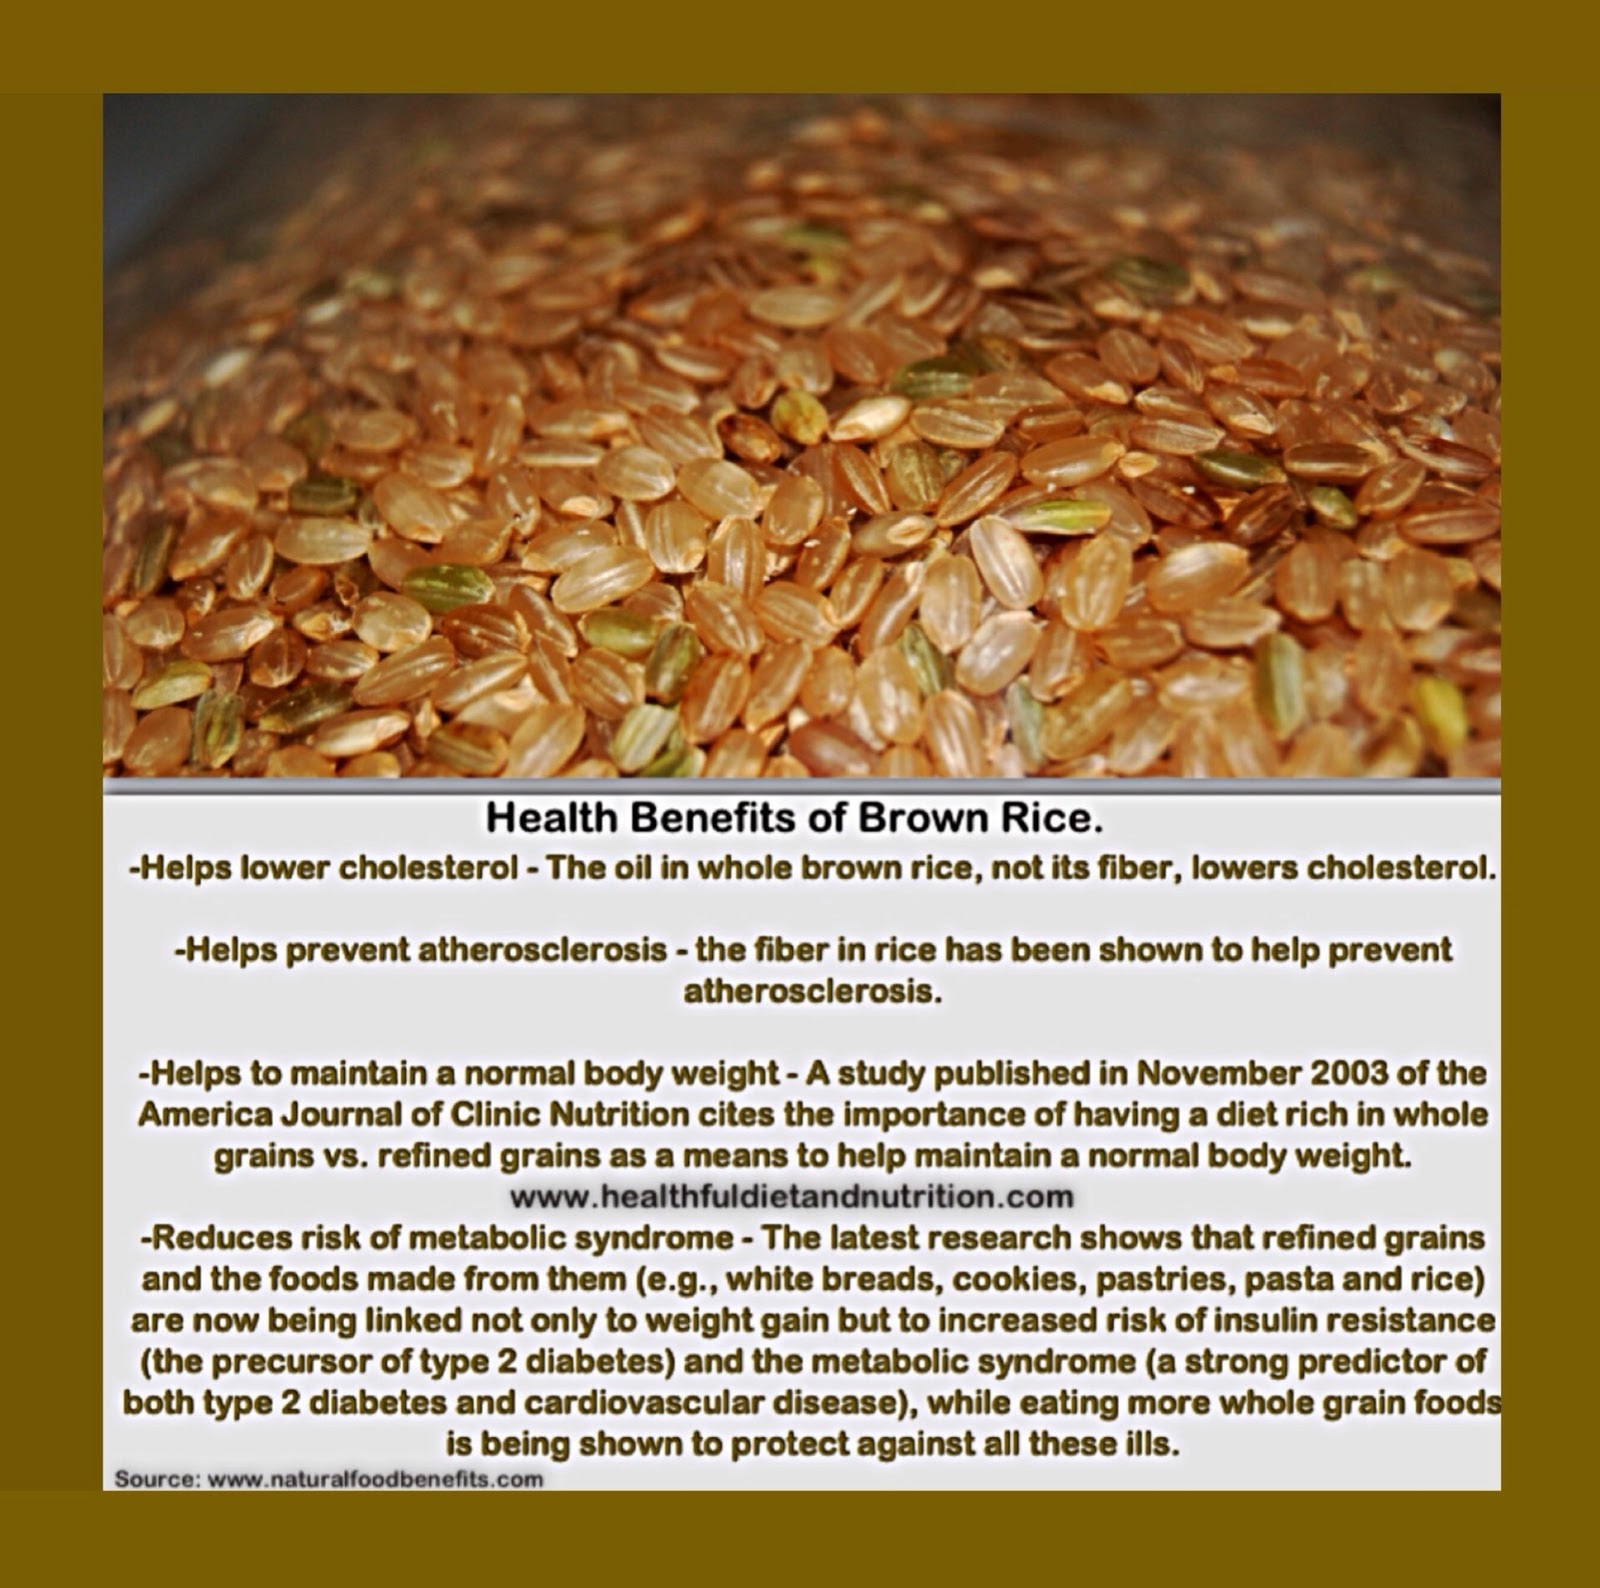 Health Benefits of Brown Rice